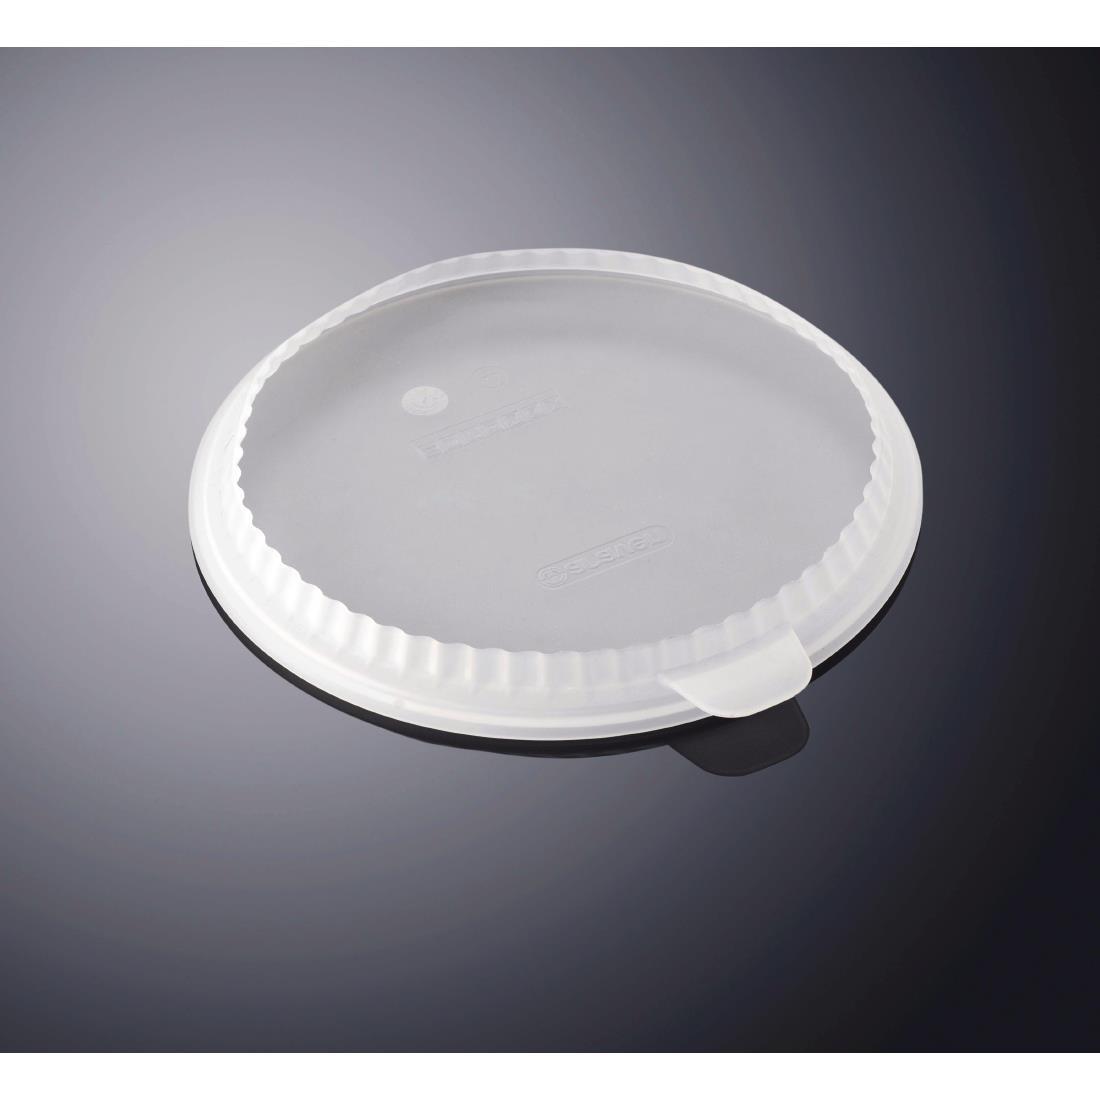 Araven Round Silicone Lid Clear 280mm - FP932  - 2